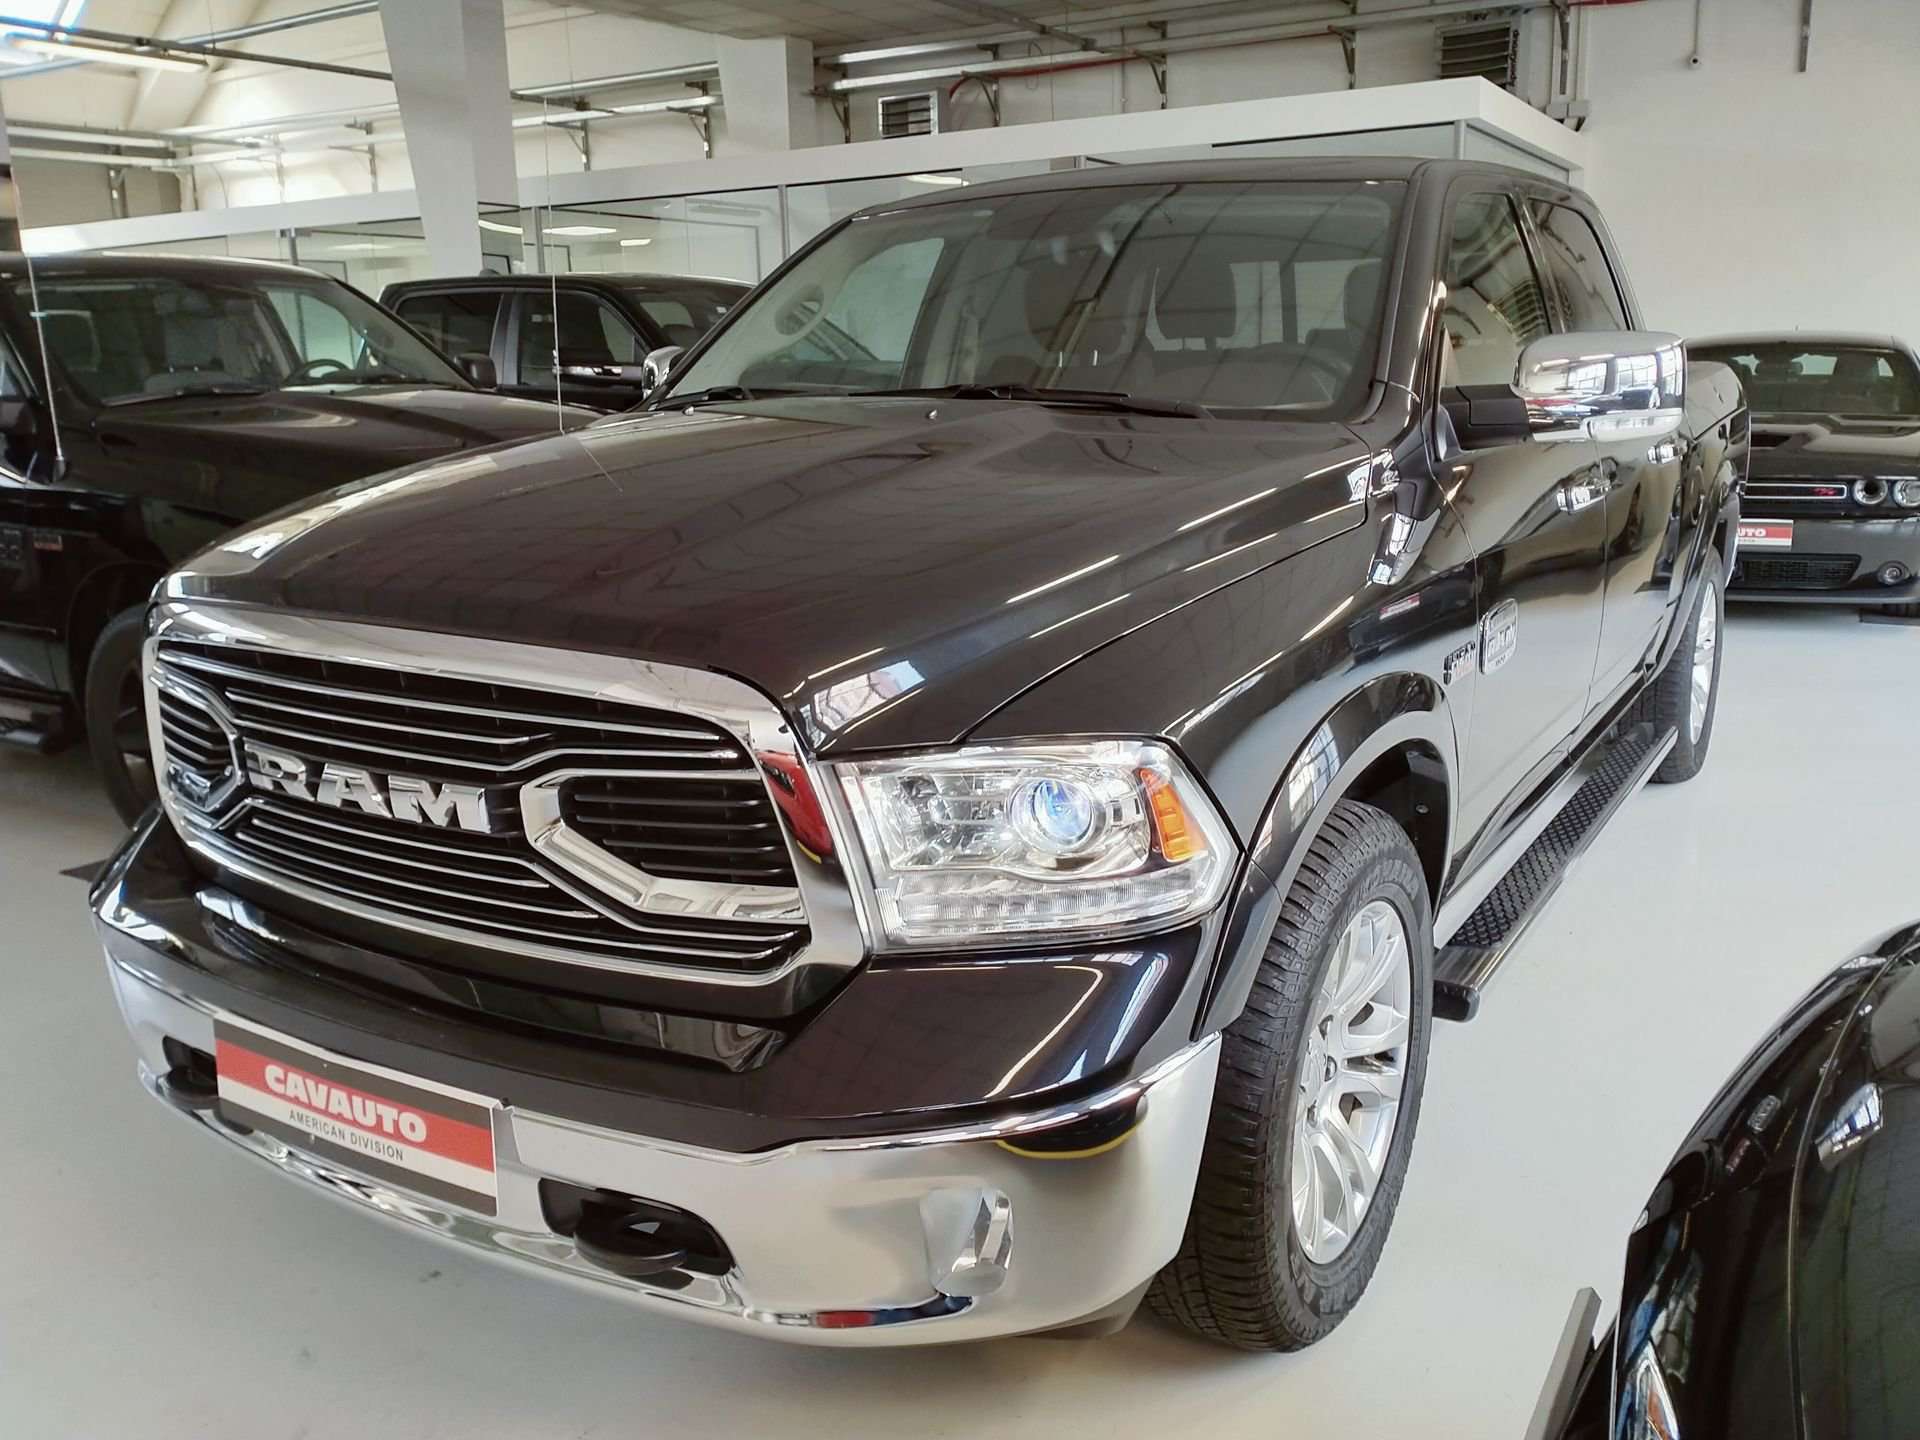 RAM 1500 Off-Road/Pick-up in Black used in Monza - Monza Brianza - Mb for € 44,500.-